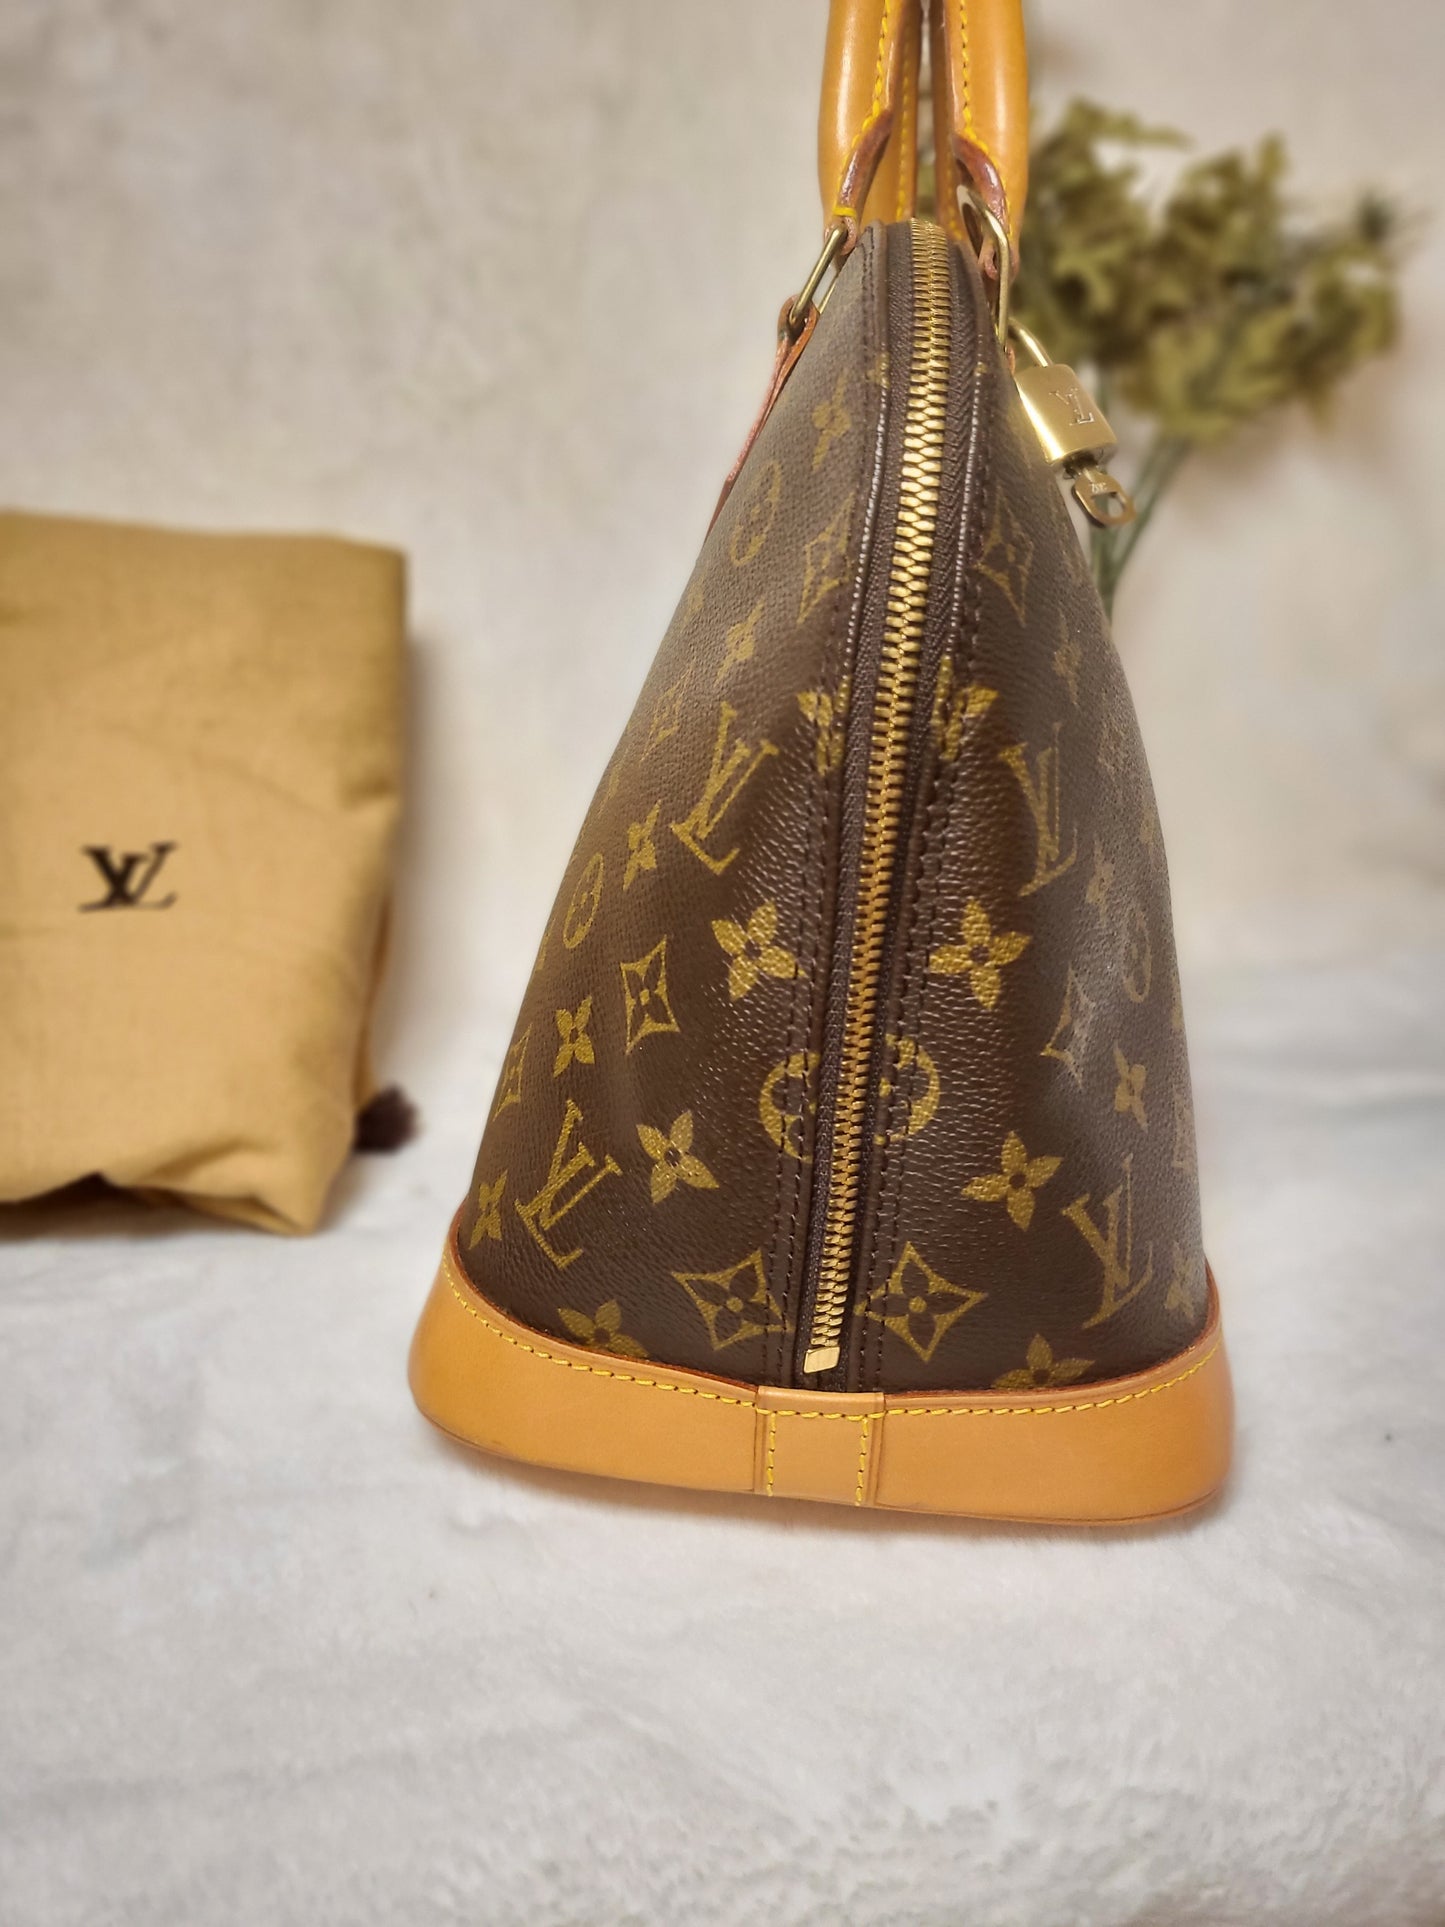 Authentic pre-owned Louis Vuitton Alma pm with lock set